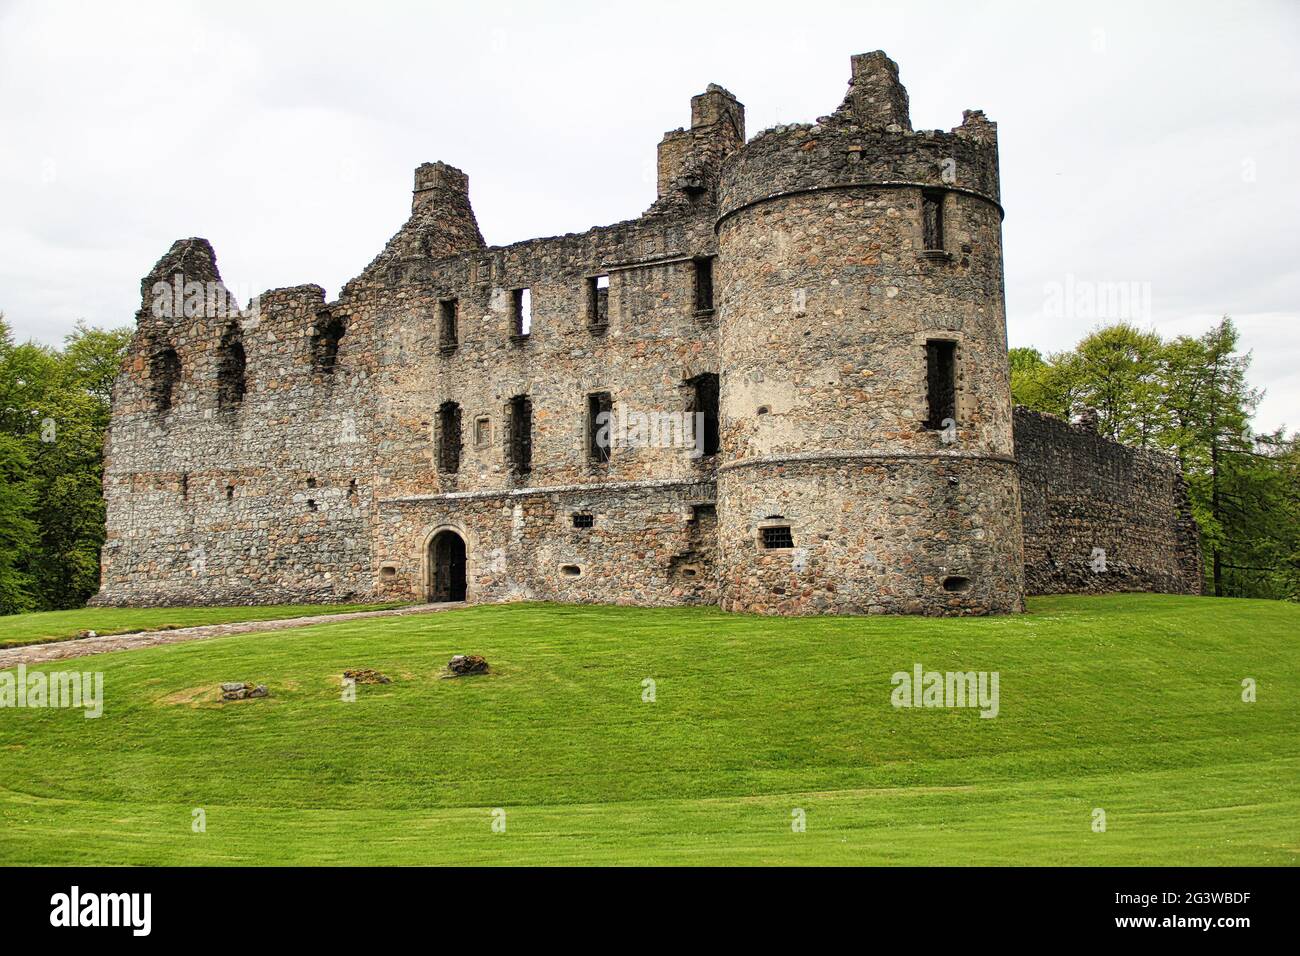 Balvenie Castle is a ruined castle 1 km north of Dufftown in the Moray region of Scotland. Stock Photo